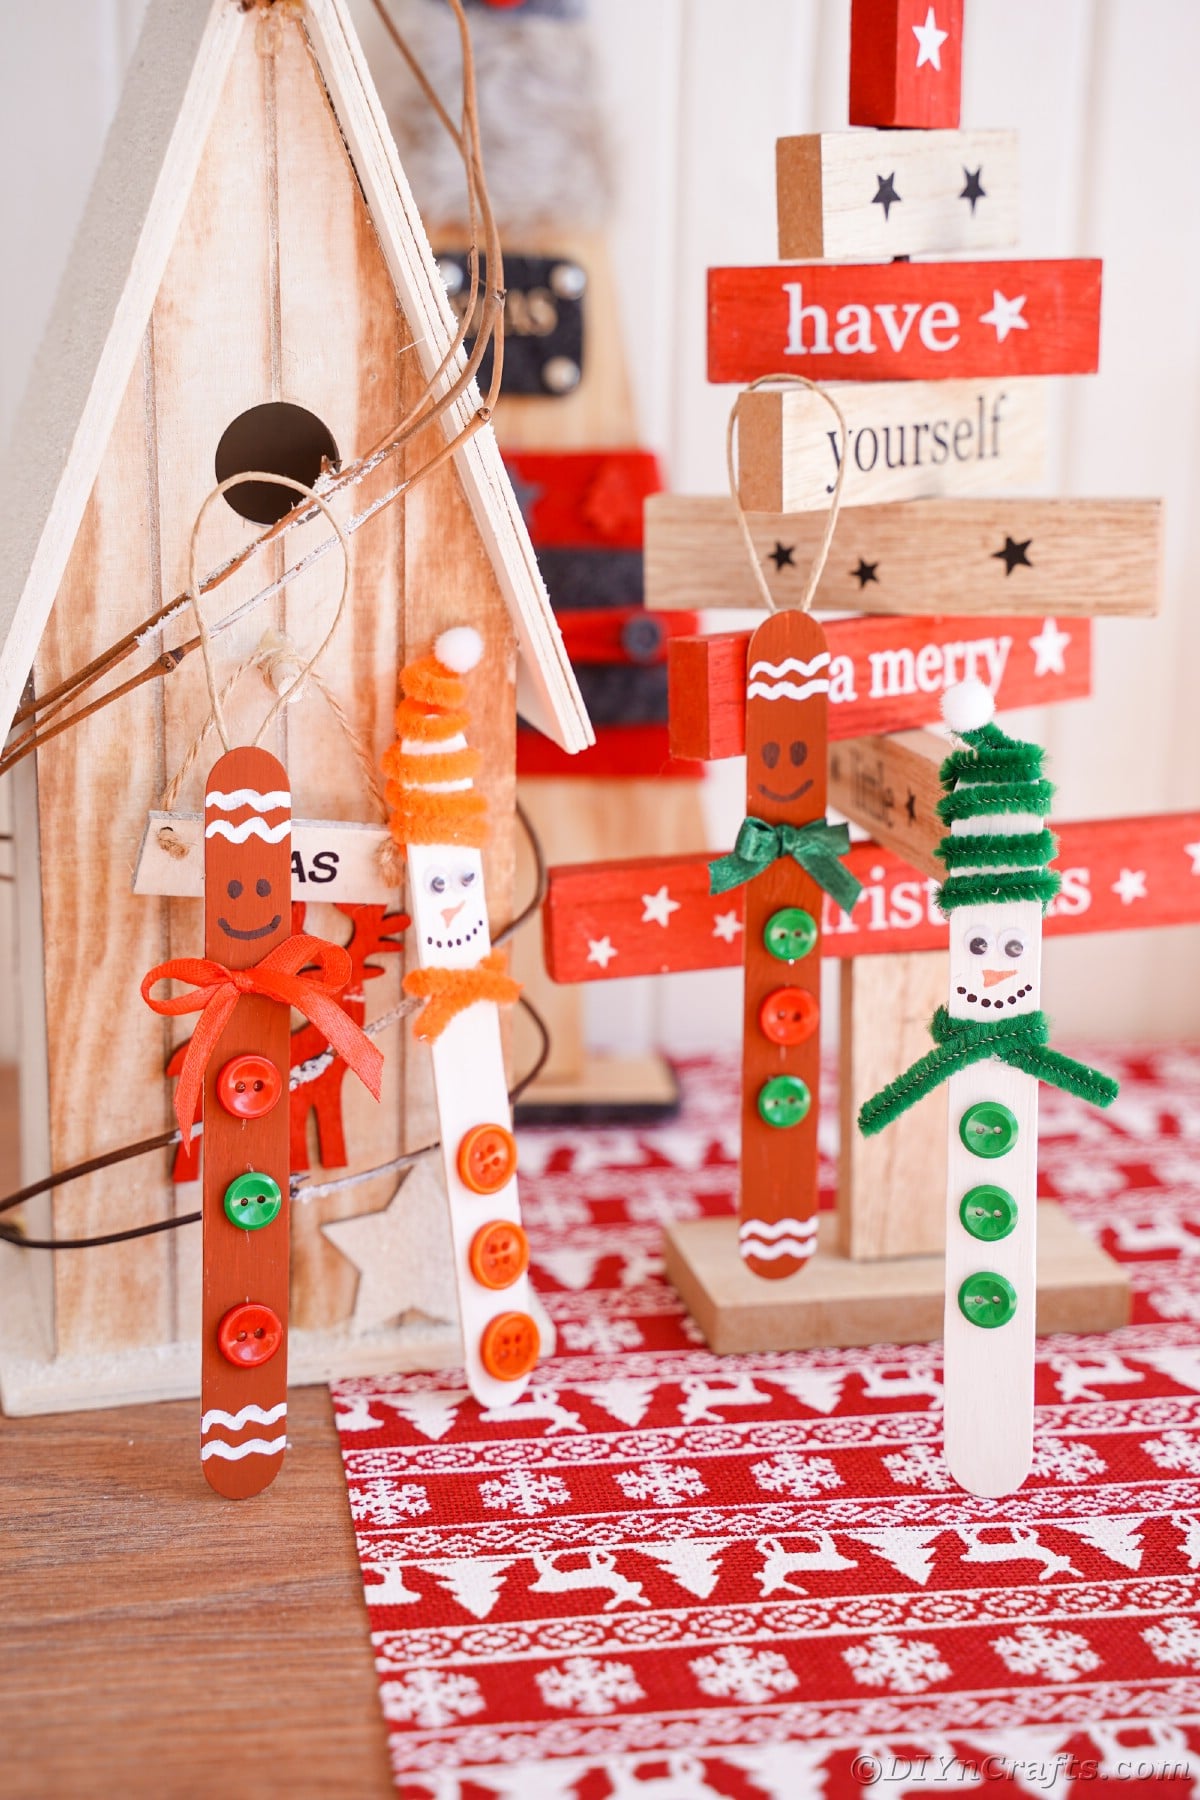 four craft stick ornaments standing up in front of wood Christmas decorations